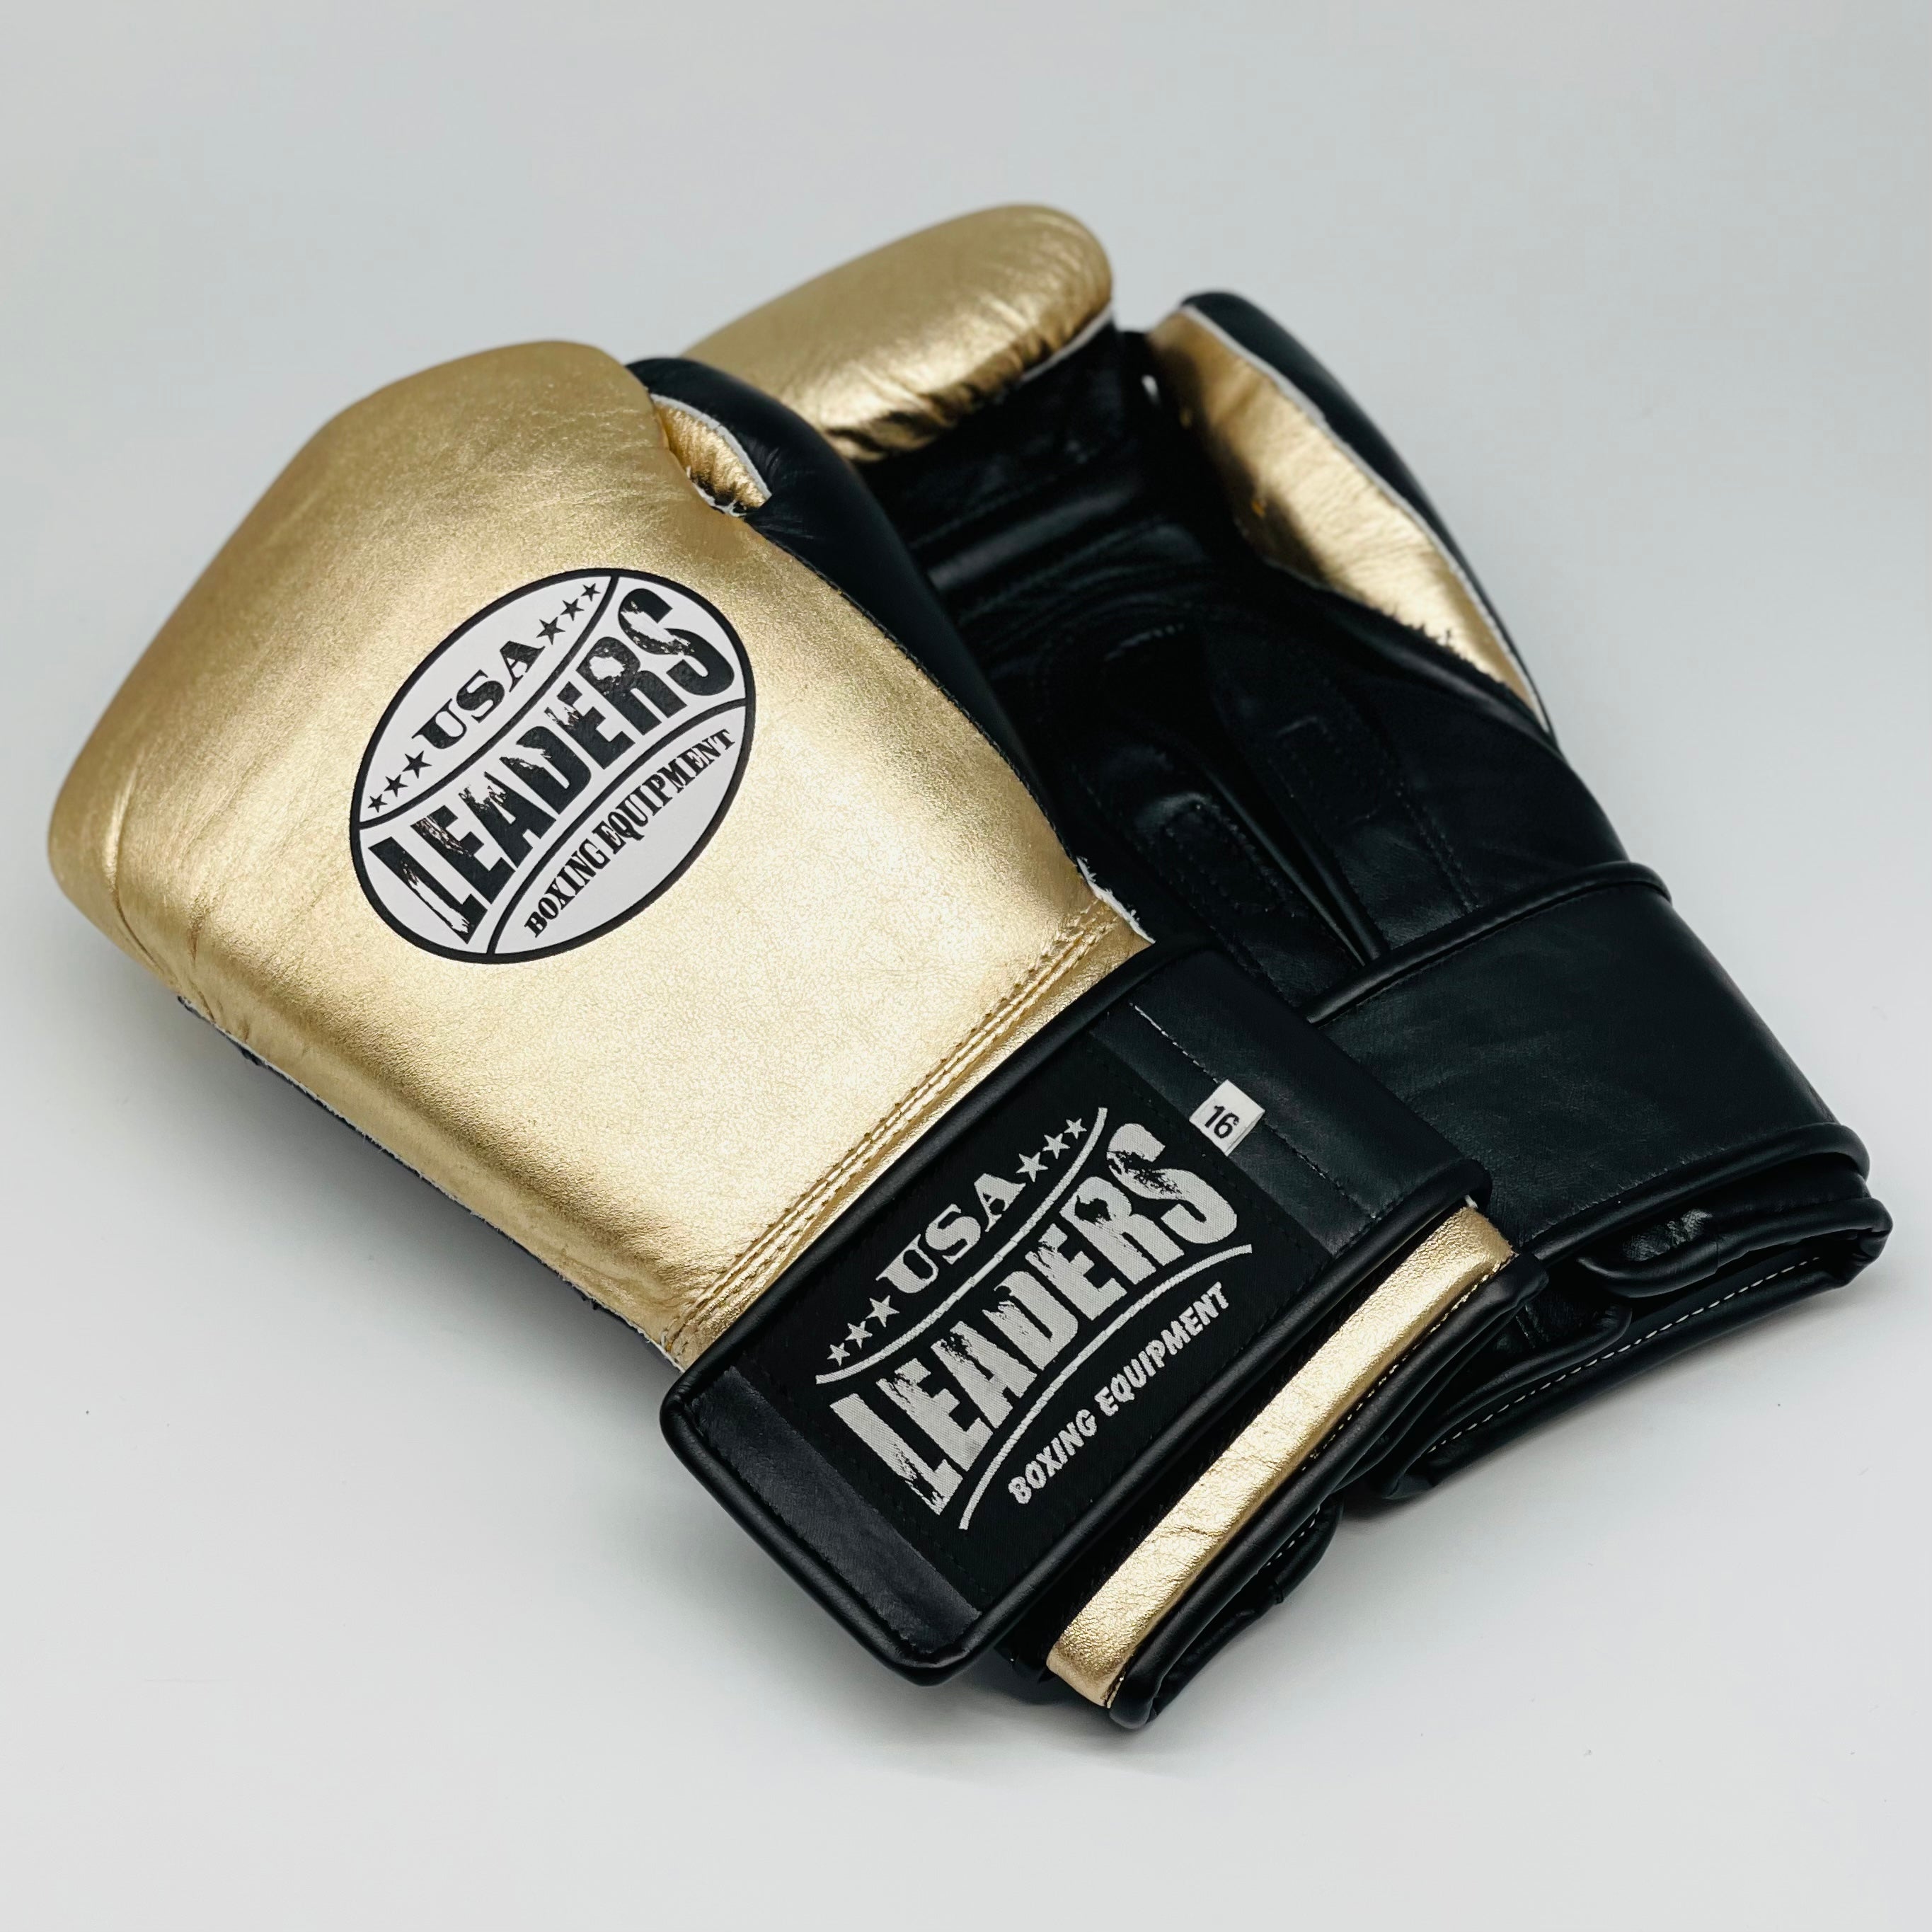 SuperLEAD MEX Boxing Gloves Laced (Metallic Green-Gold) – Leaders Boxing USA